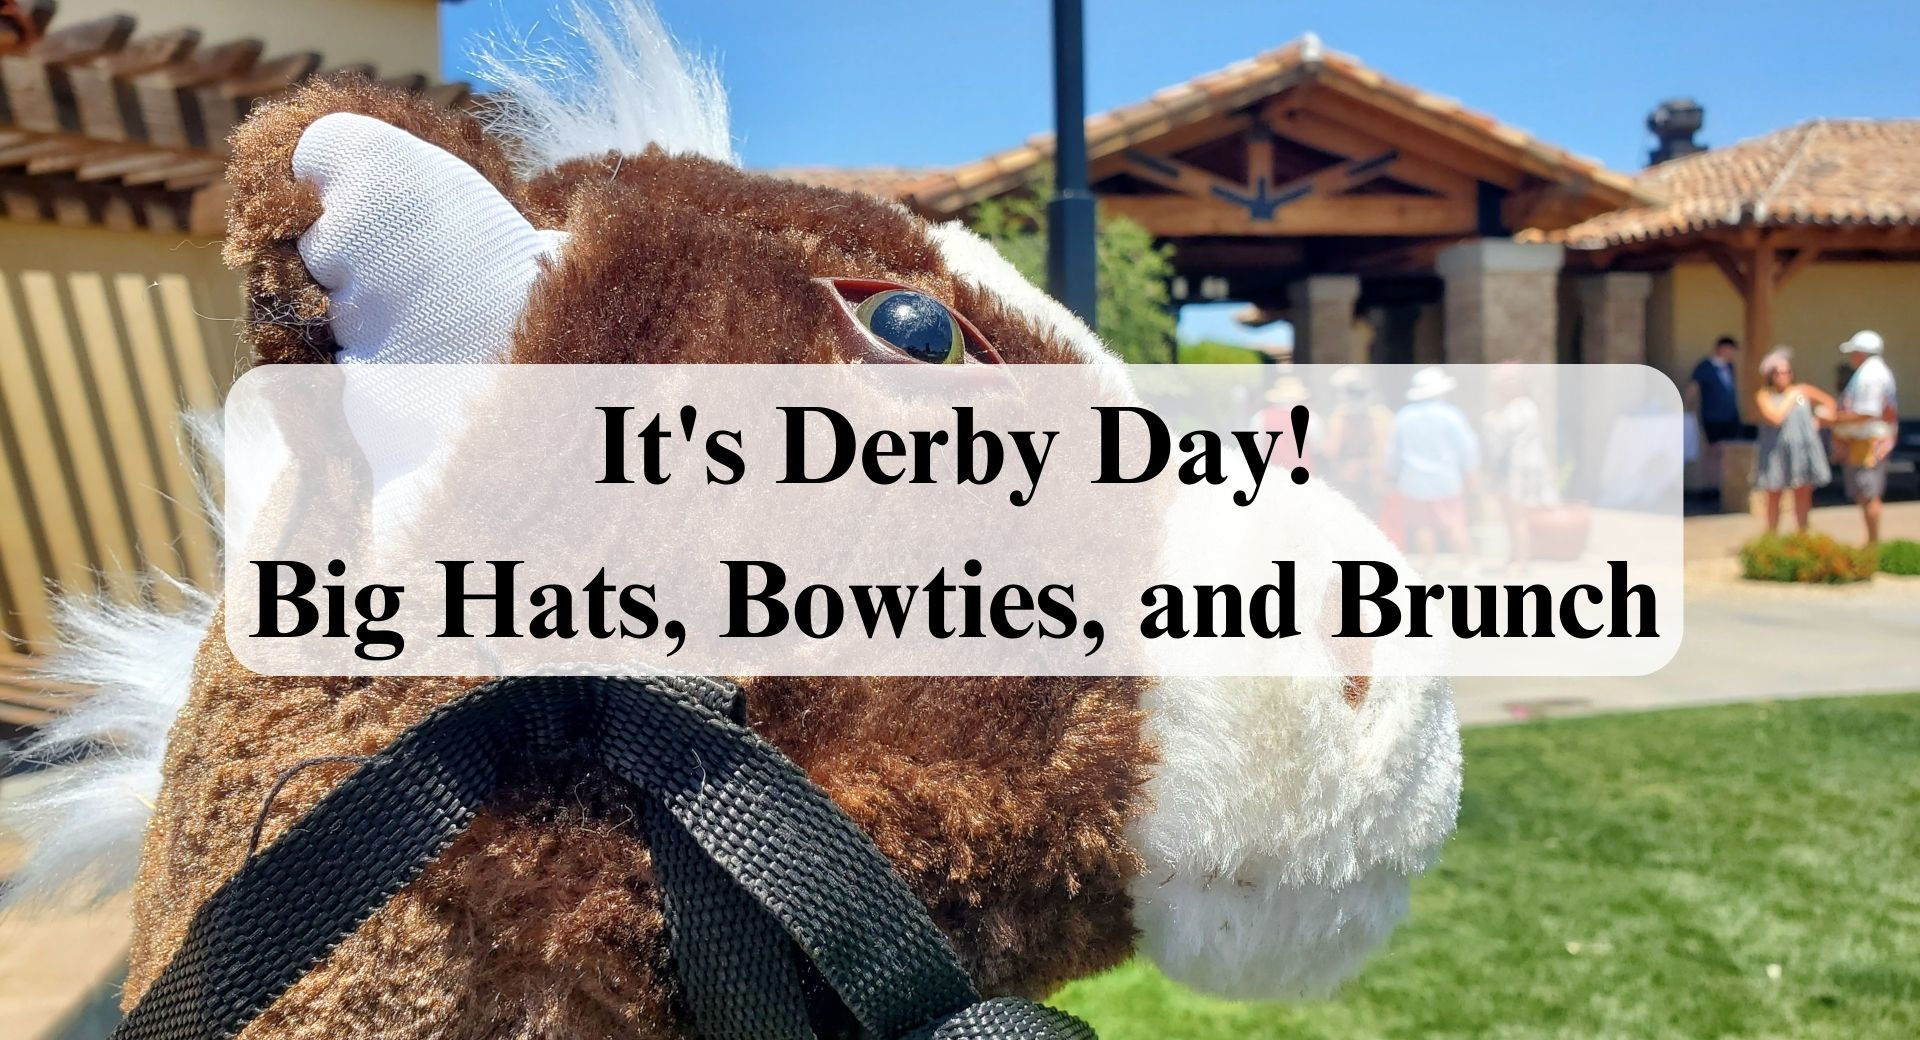 It's Derby Day! - Big Hats, Bowties, and Brunch